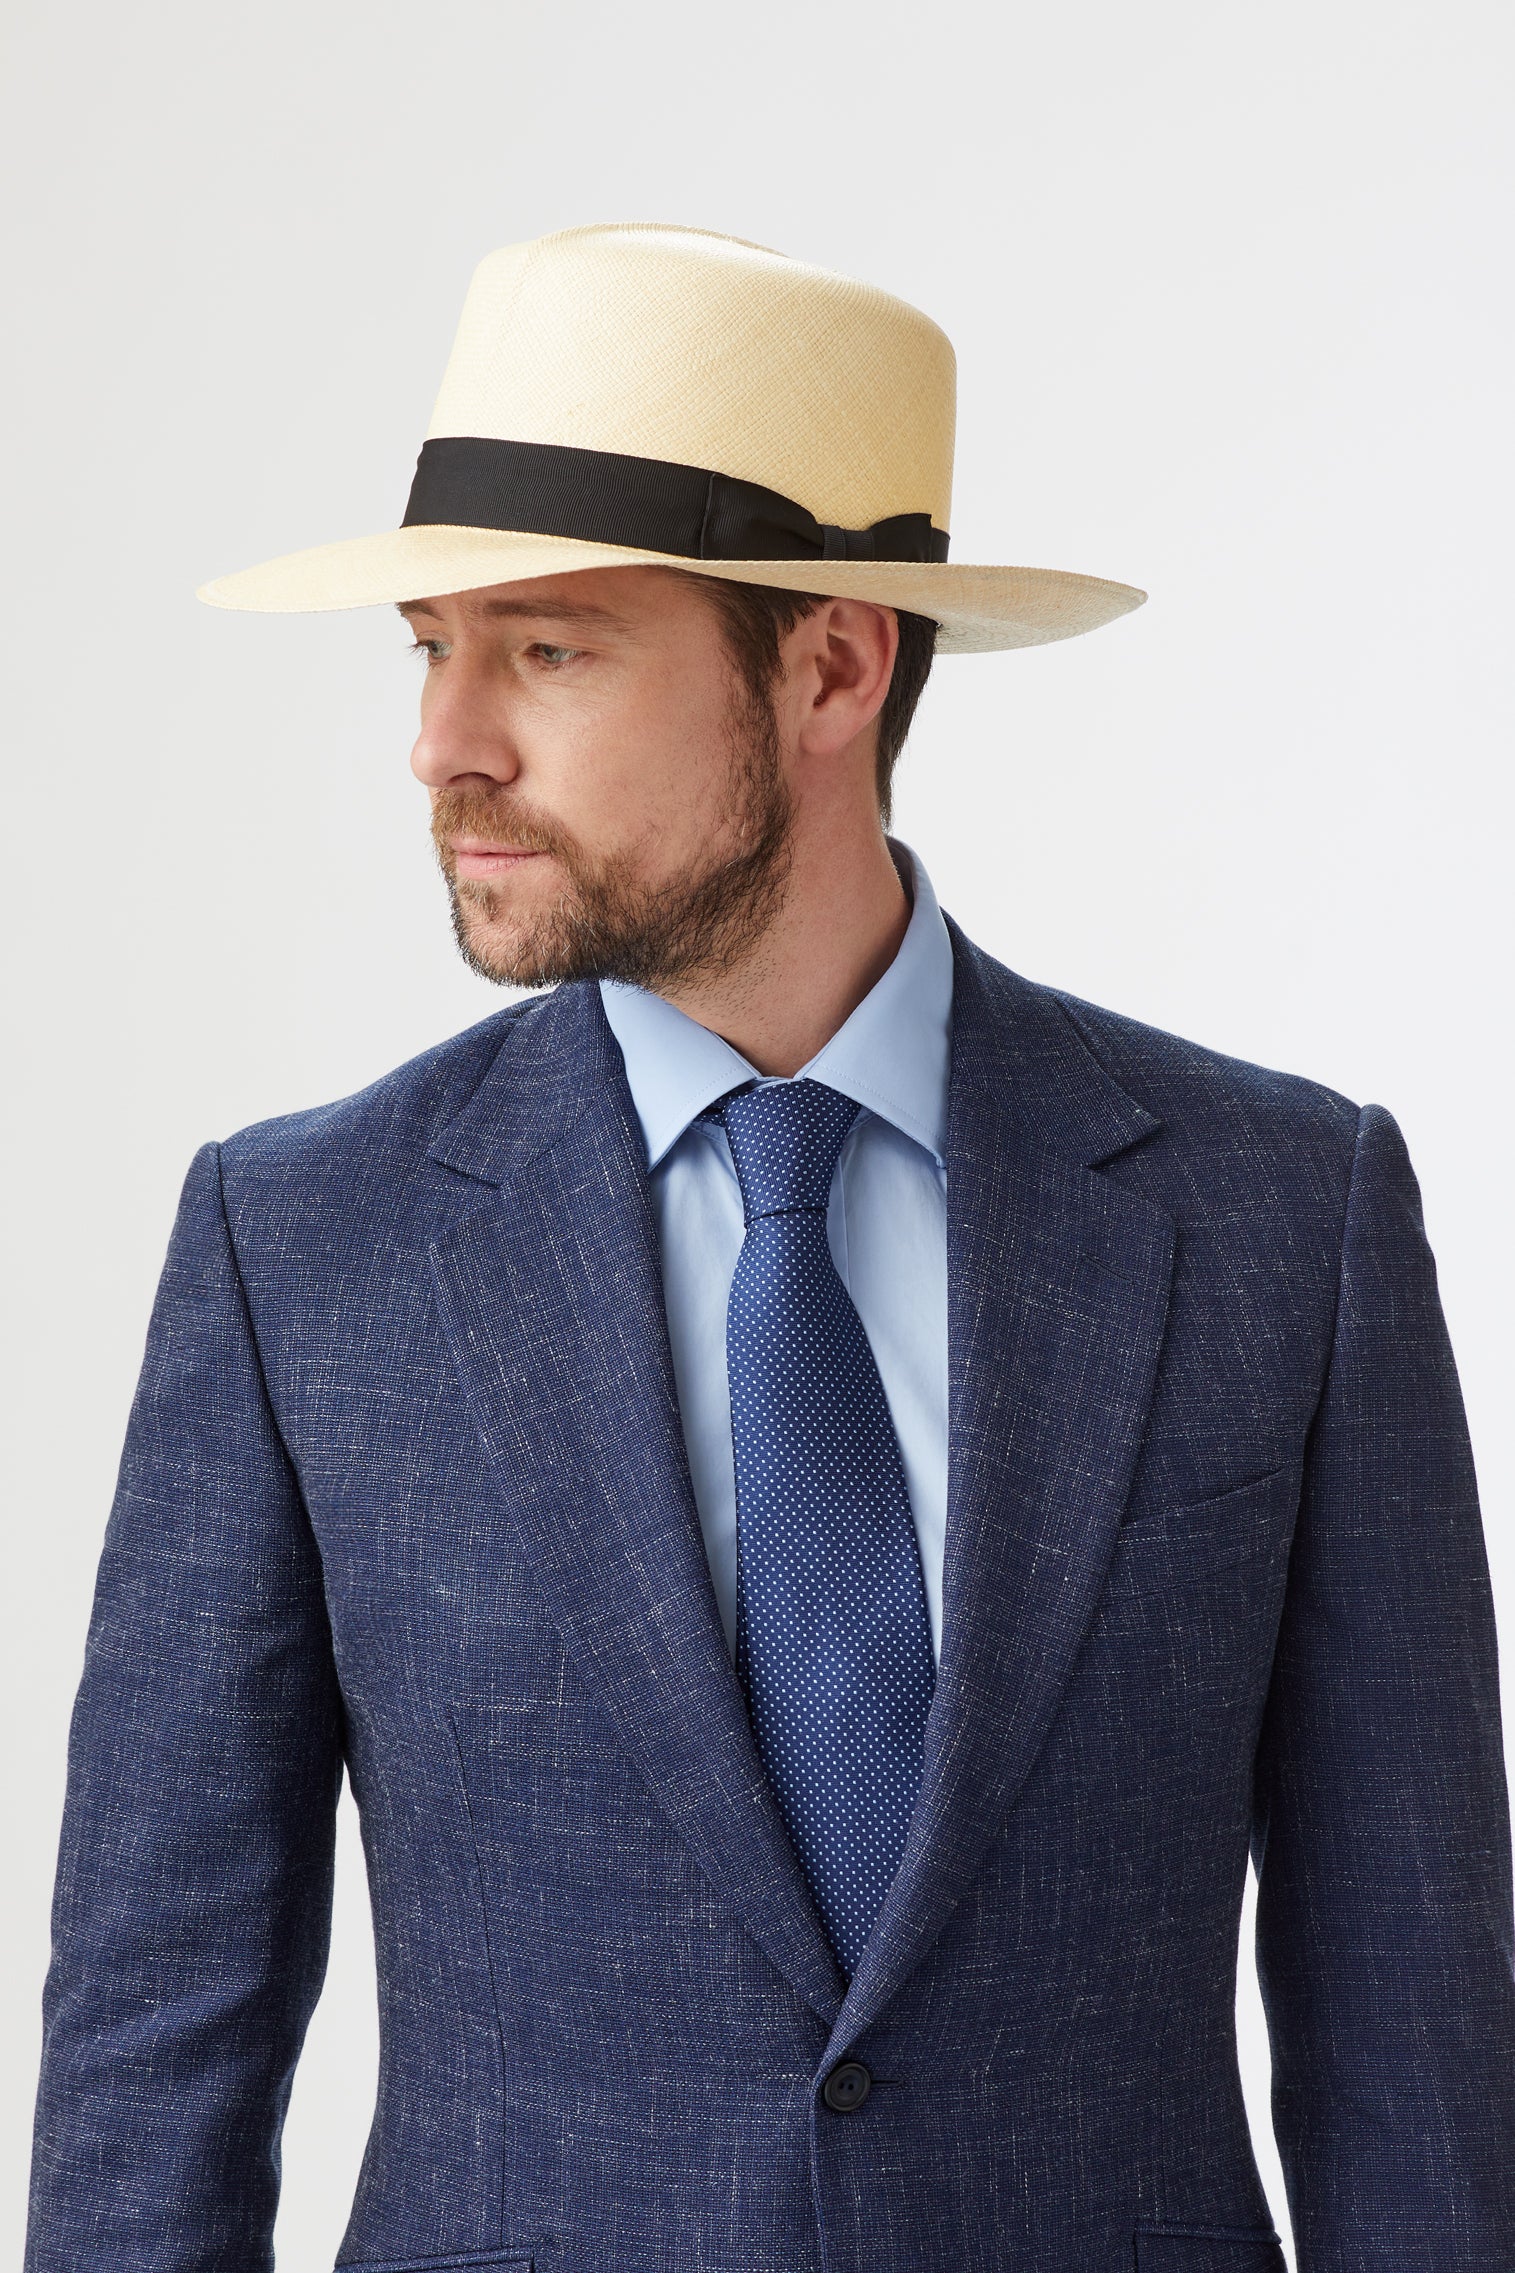 Men's Rollable Panama - Hats for Long Face Shapes - Lock & Co. Hatters London UK